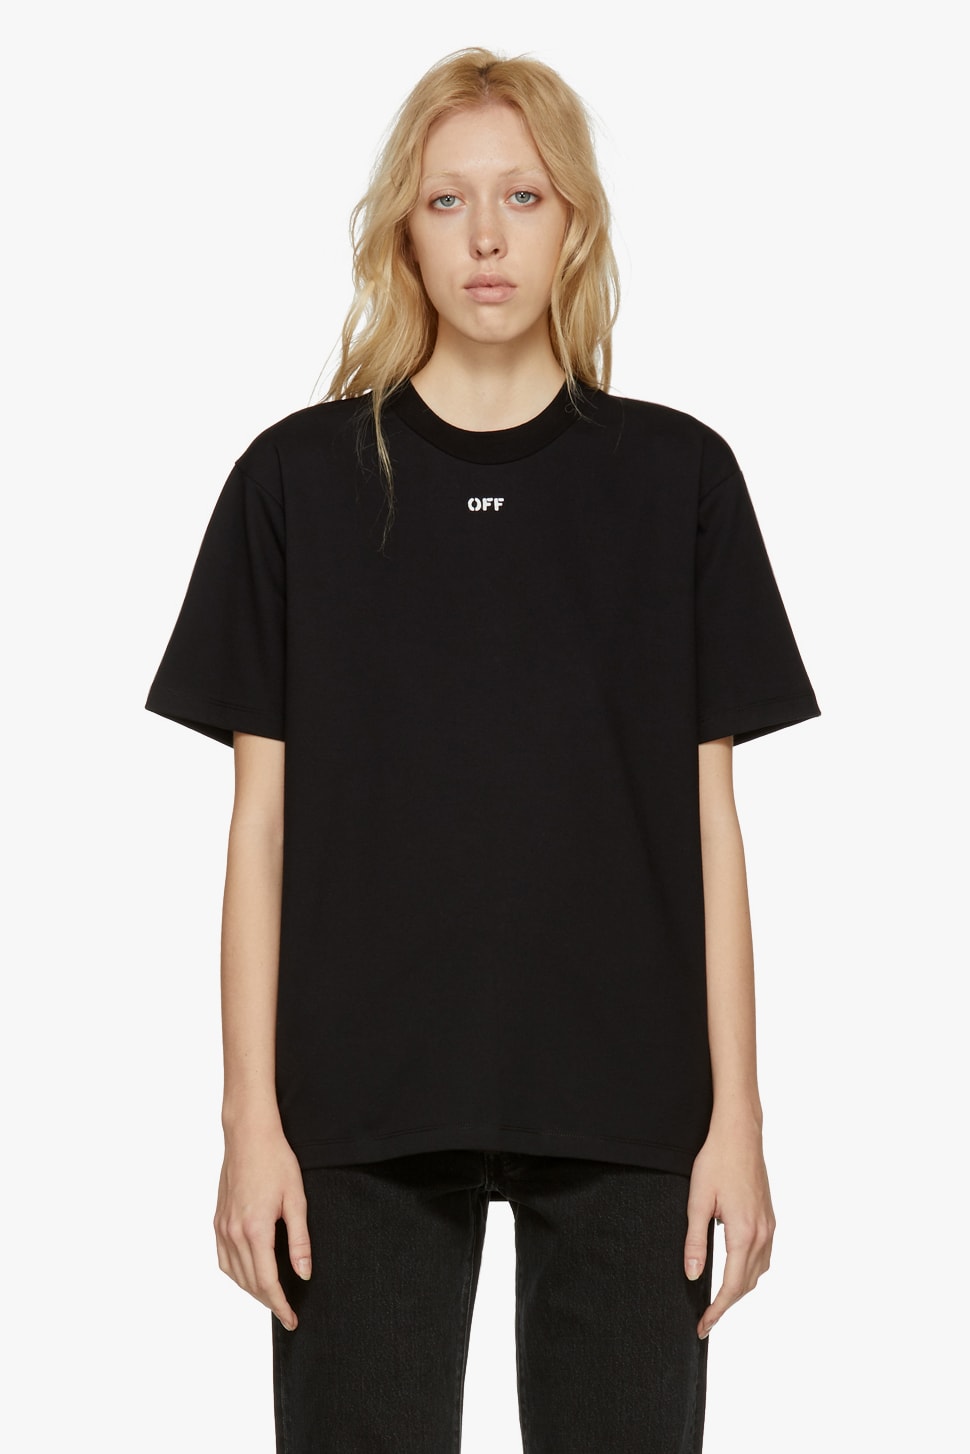 Off-White New Arrivals Spring Collection "OFF" T-Shirt